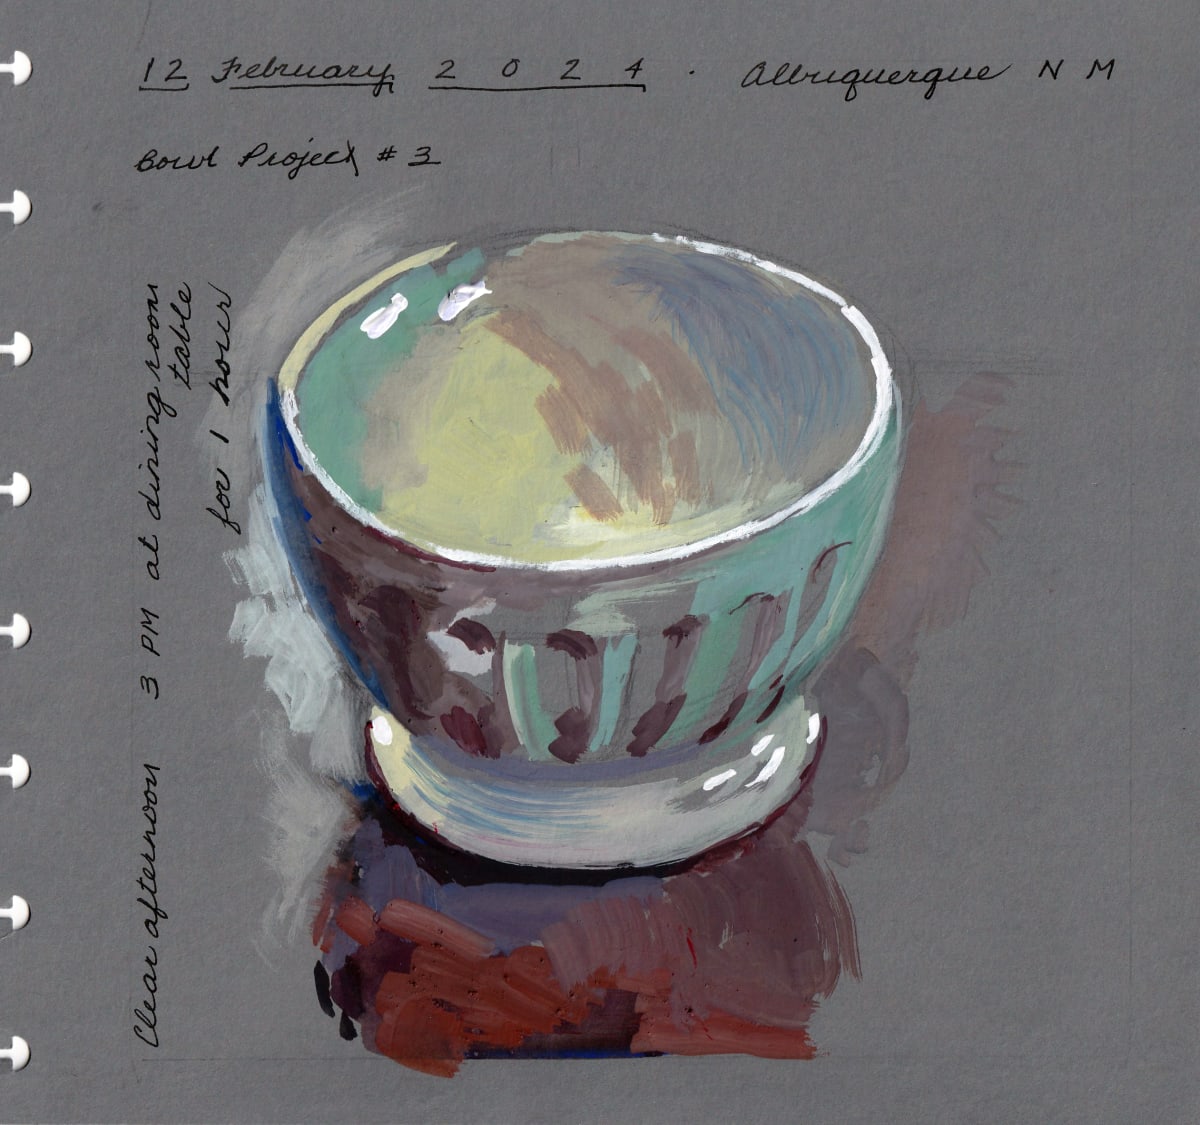 Journey Daybook Page by Margaret Pulis Herrick (Peggy)  Image: Bowl Project #3